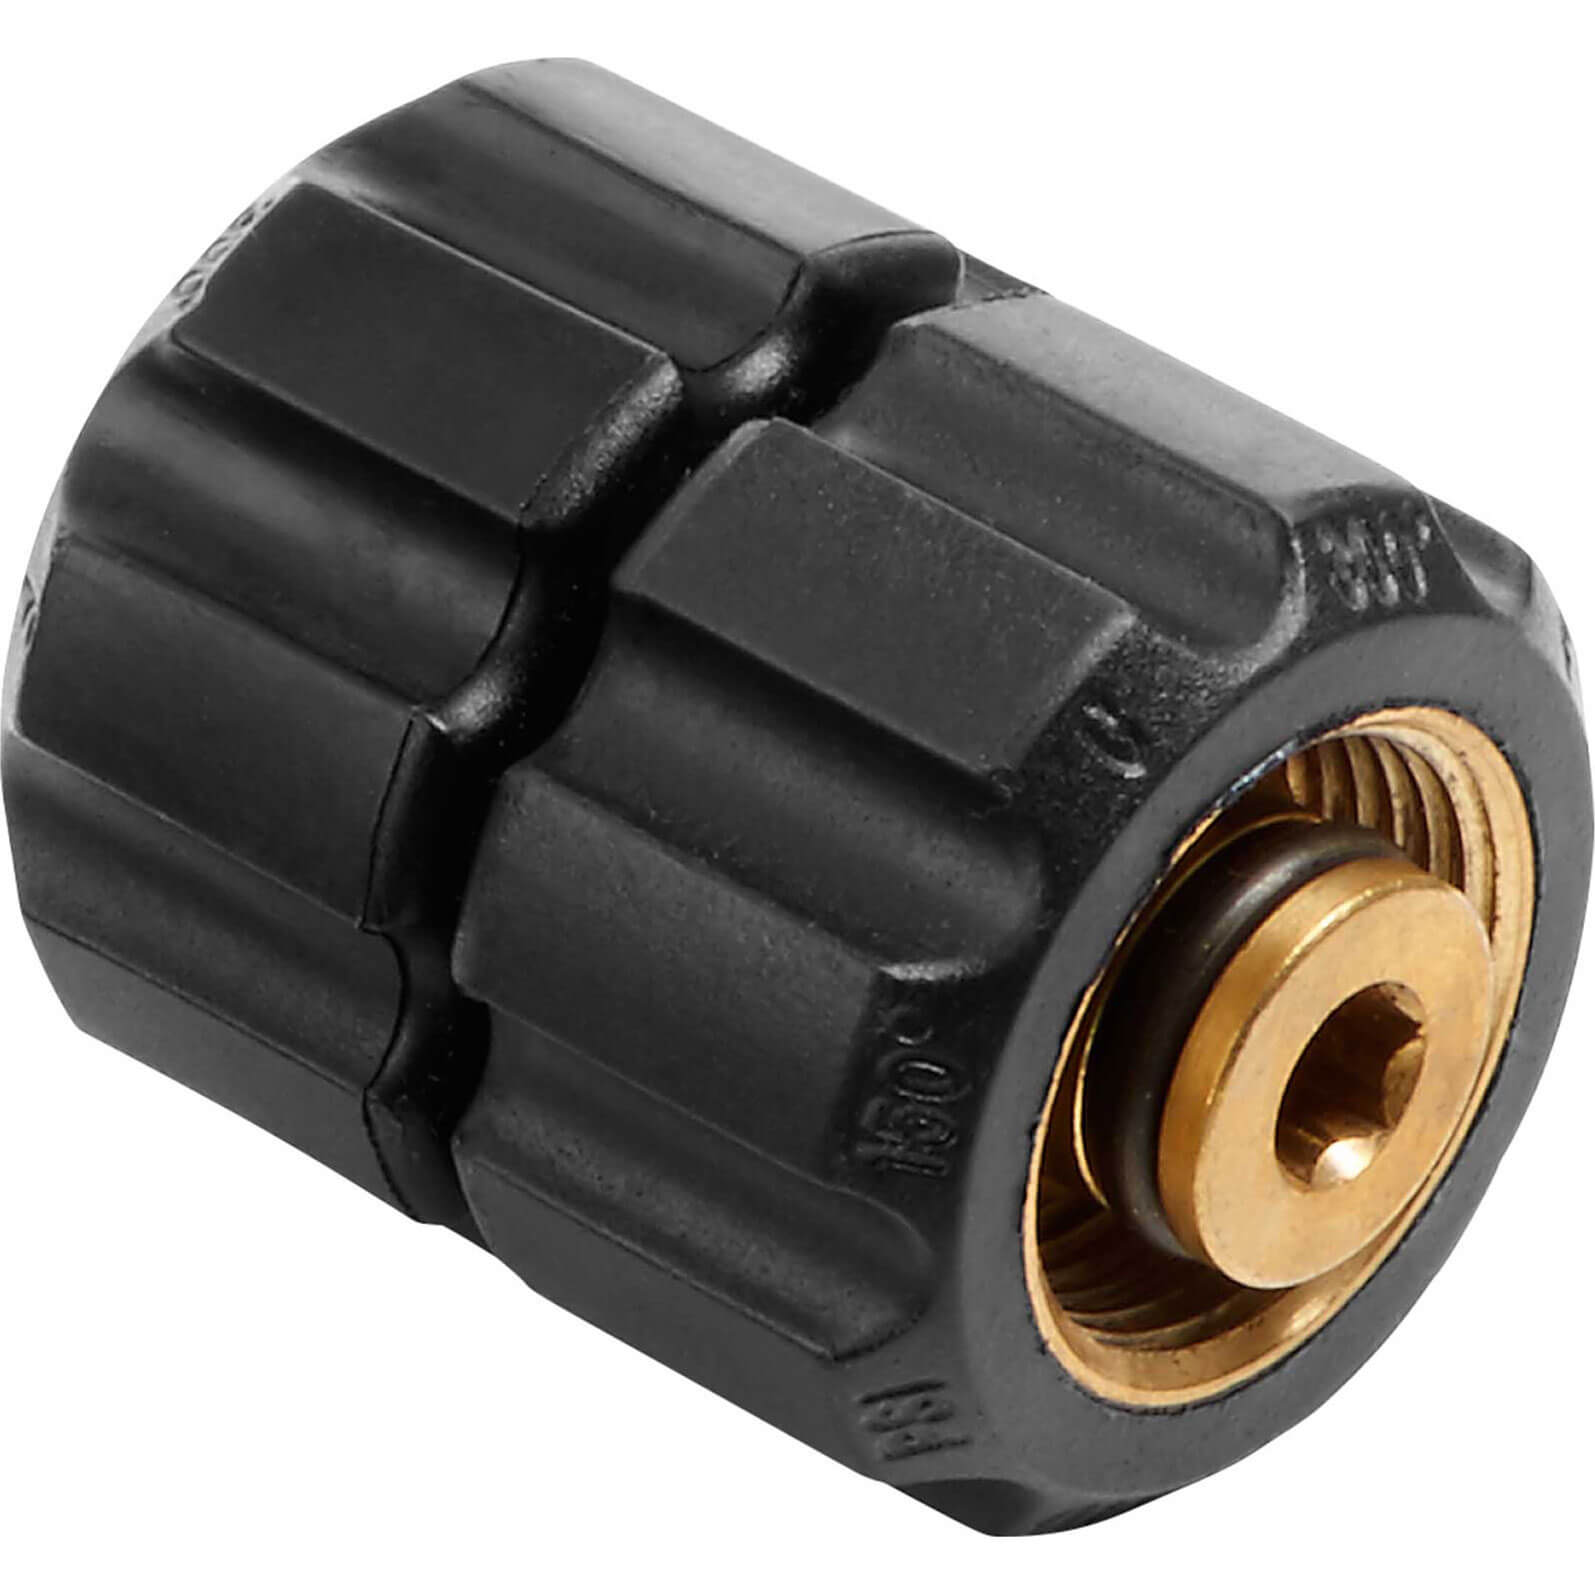 Image of Bosch Adaptor for GHP 5-14 C, 5-14 and 6-14 Pressure Washers